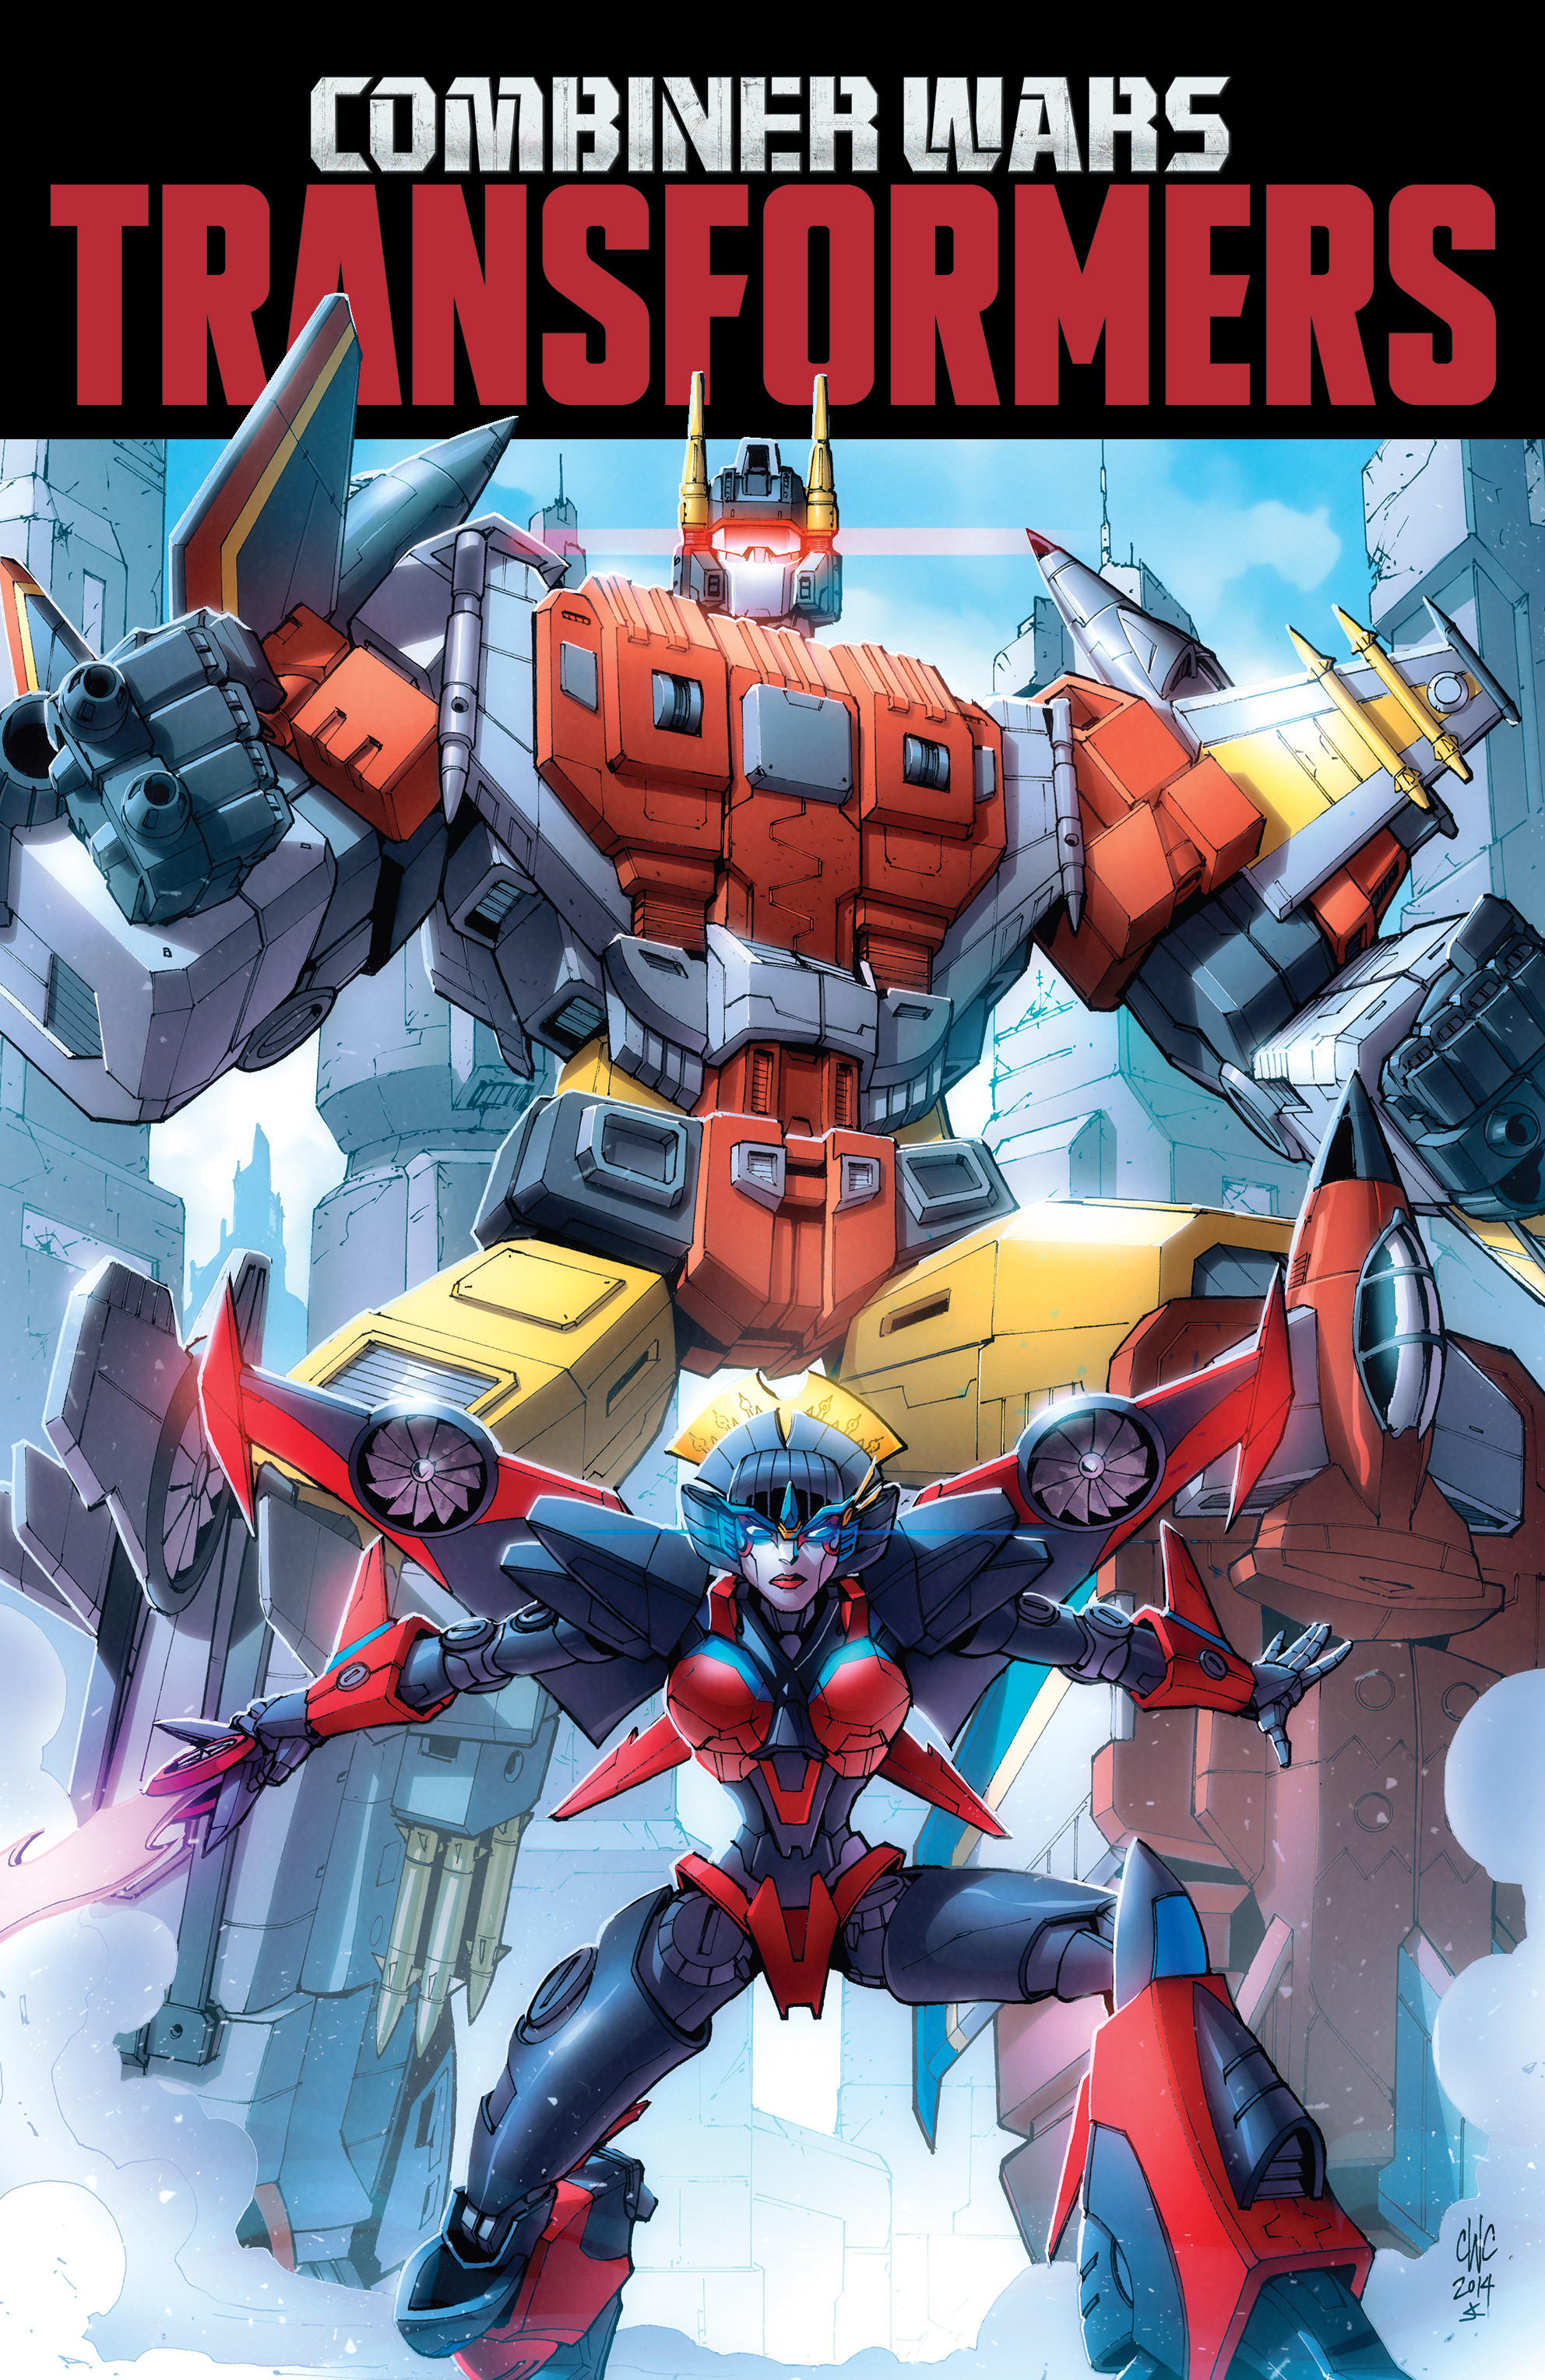 Read online Transformers: Combiner Wars comic -  Issue # TPB - 1